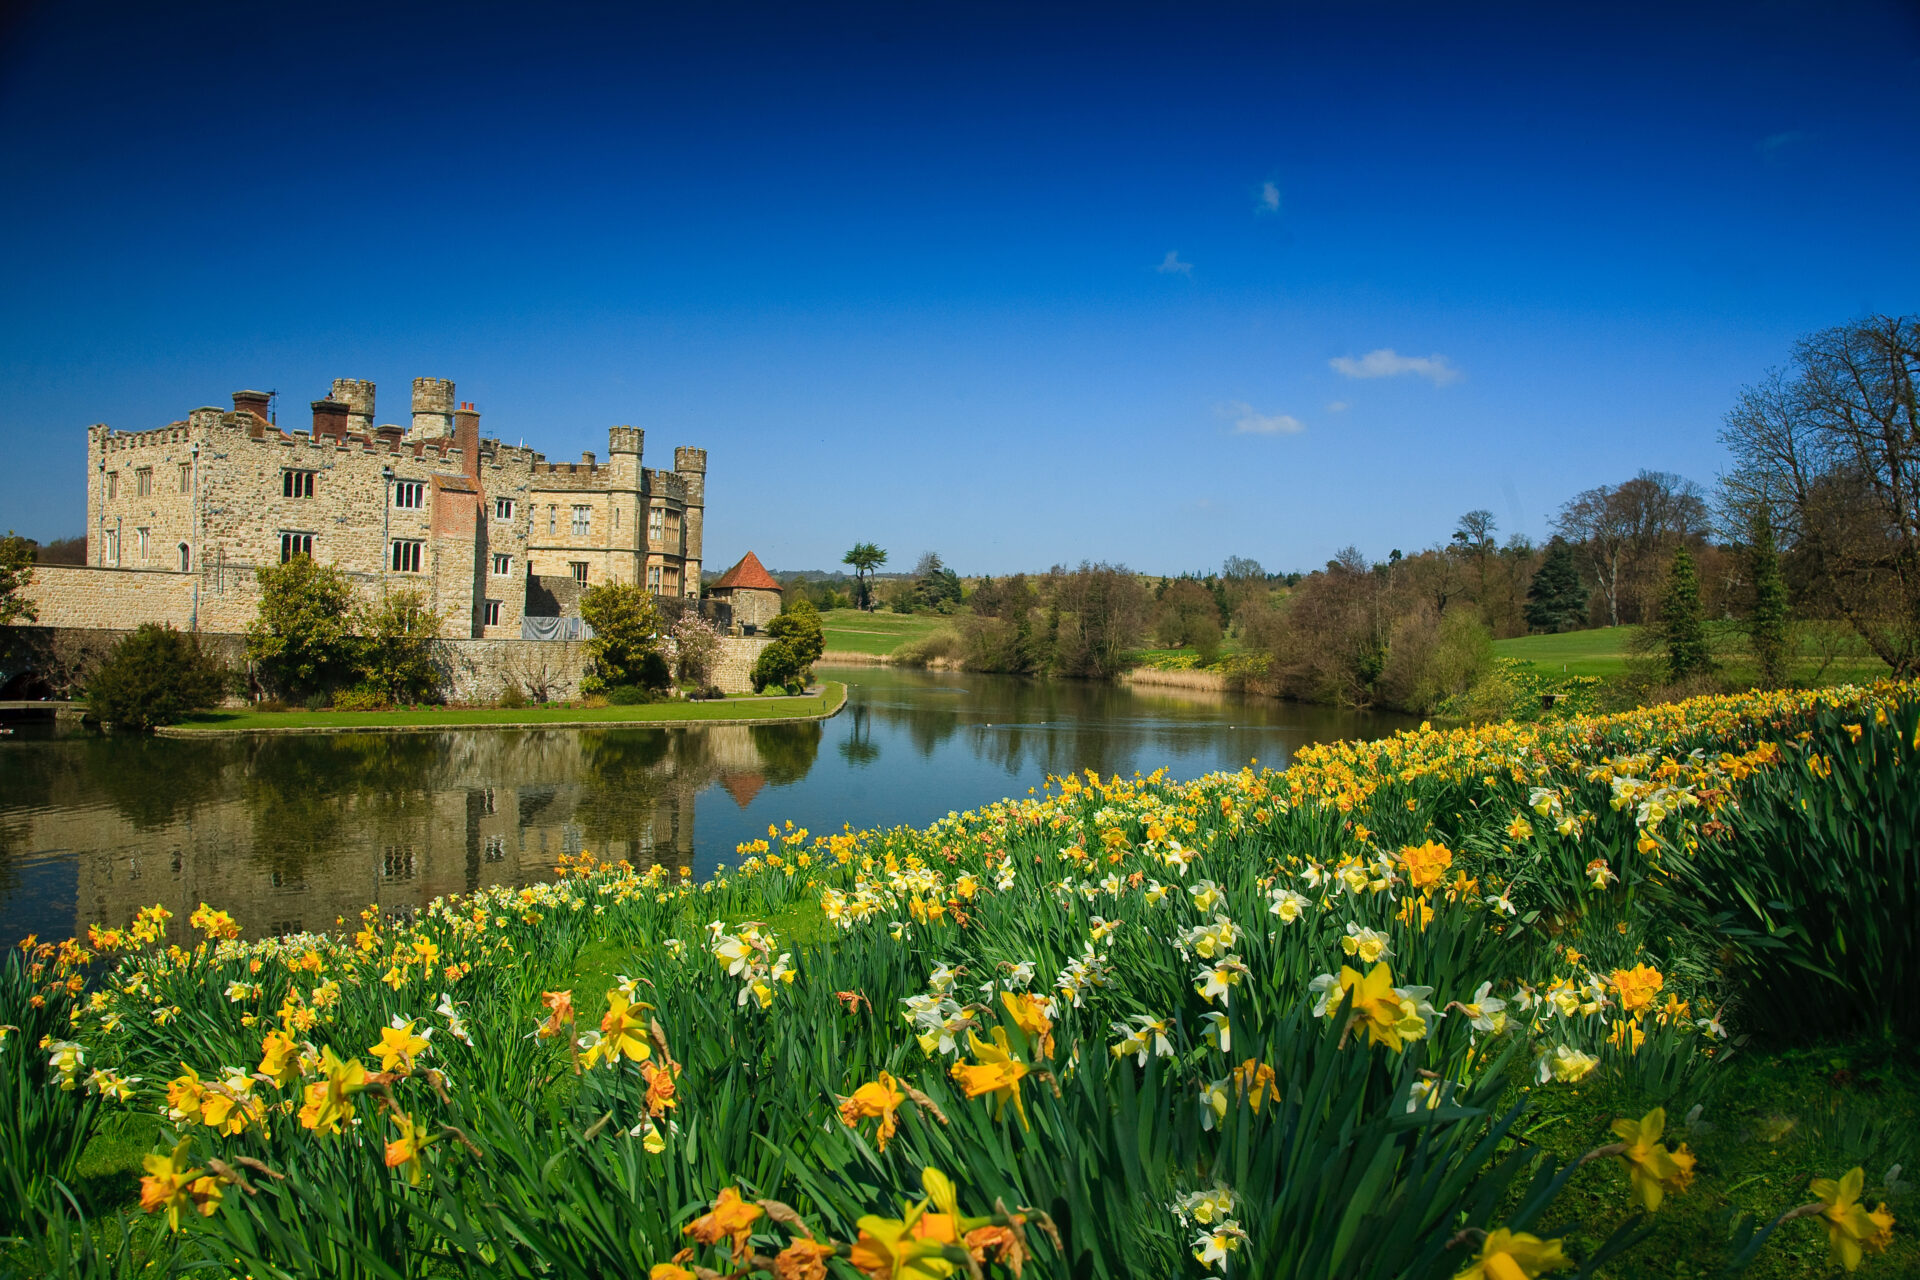 Castle surrounded by moat and daffodils